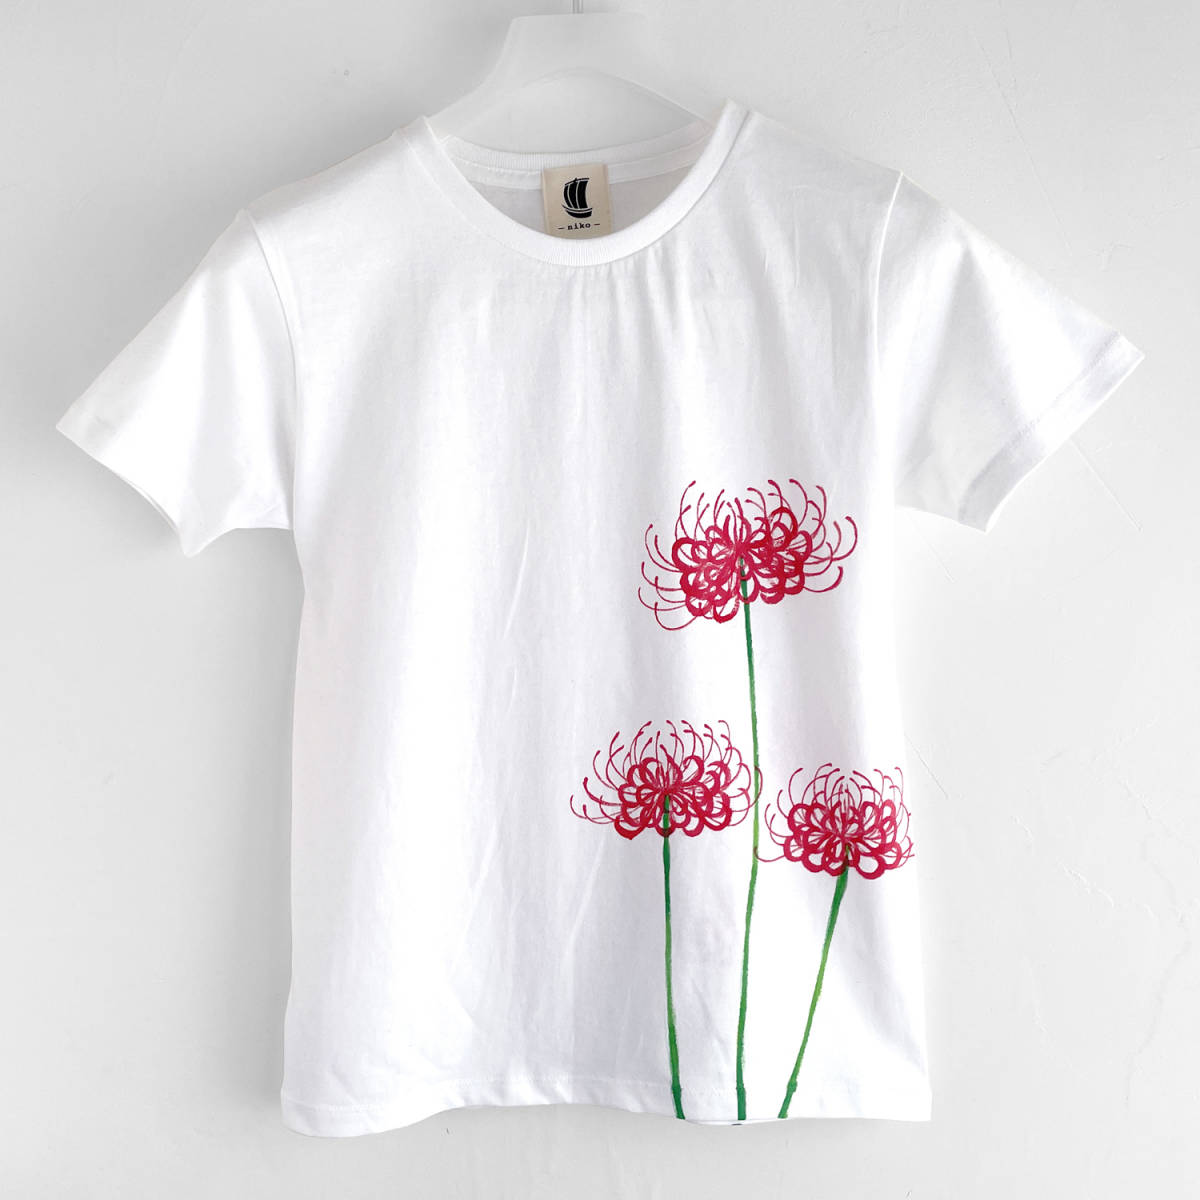 Women's T-shirt, L size, white, red spider lily pattern T-shirt, handmade, hand-painted T-shirt, Japanese pattern, floral pattern, autumn/winter, L size, round neck, patterned